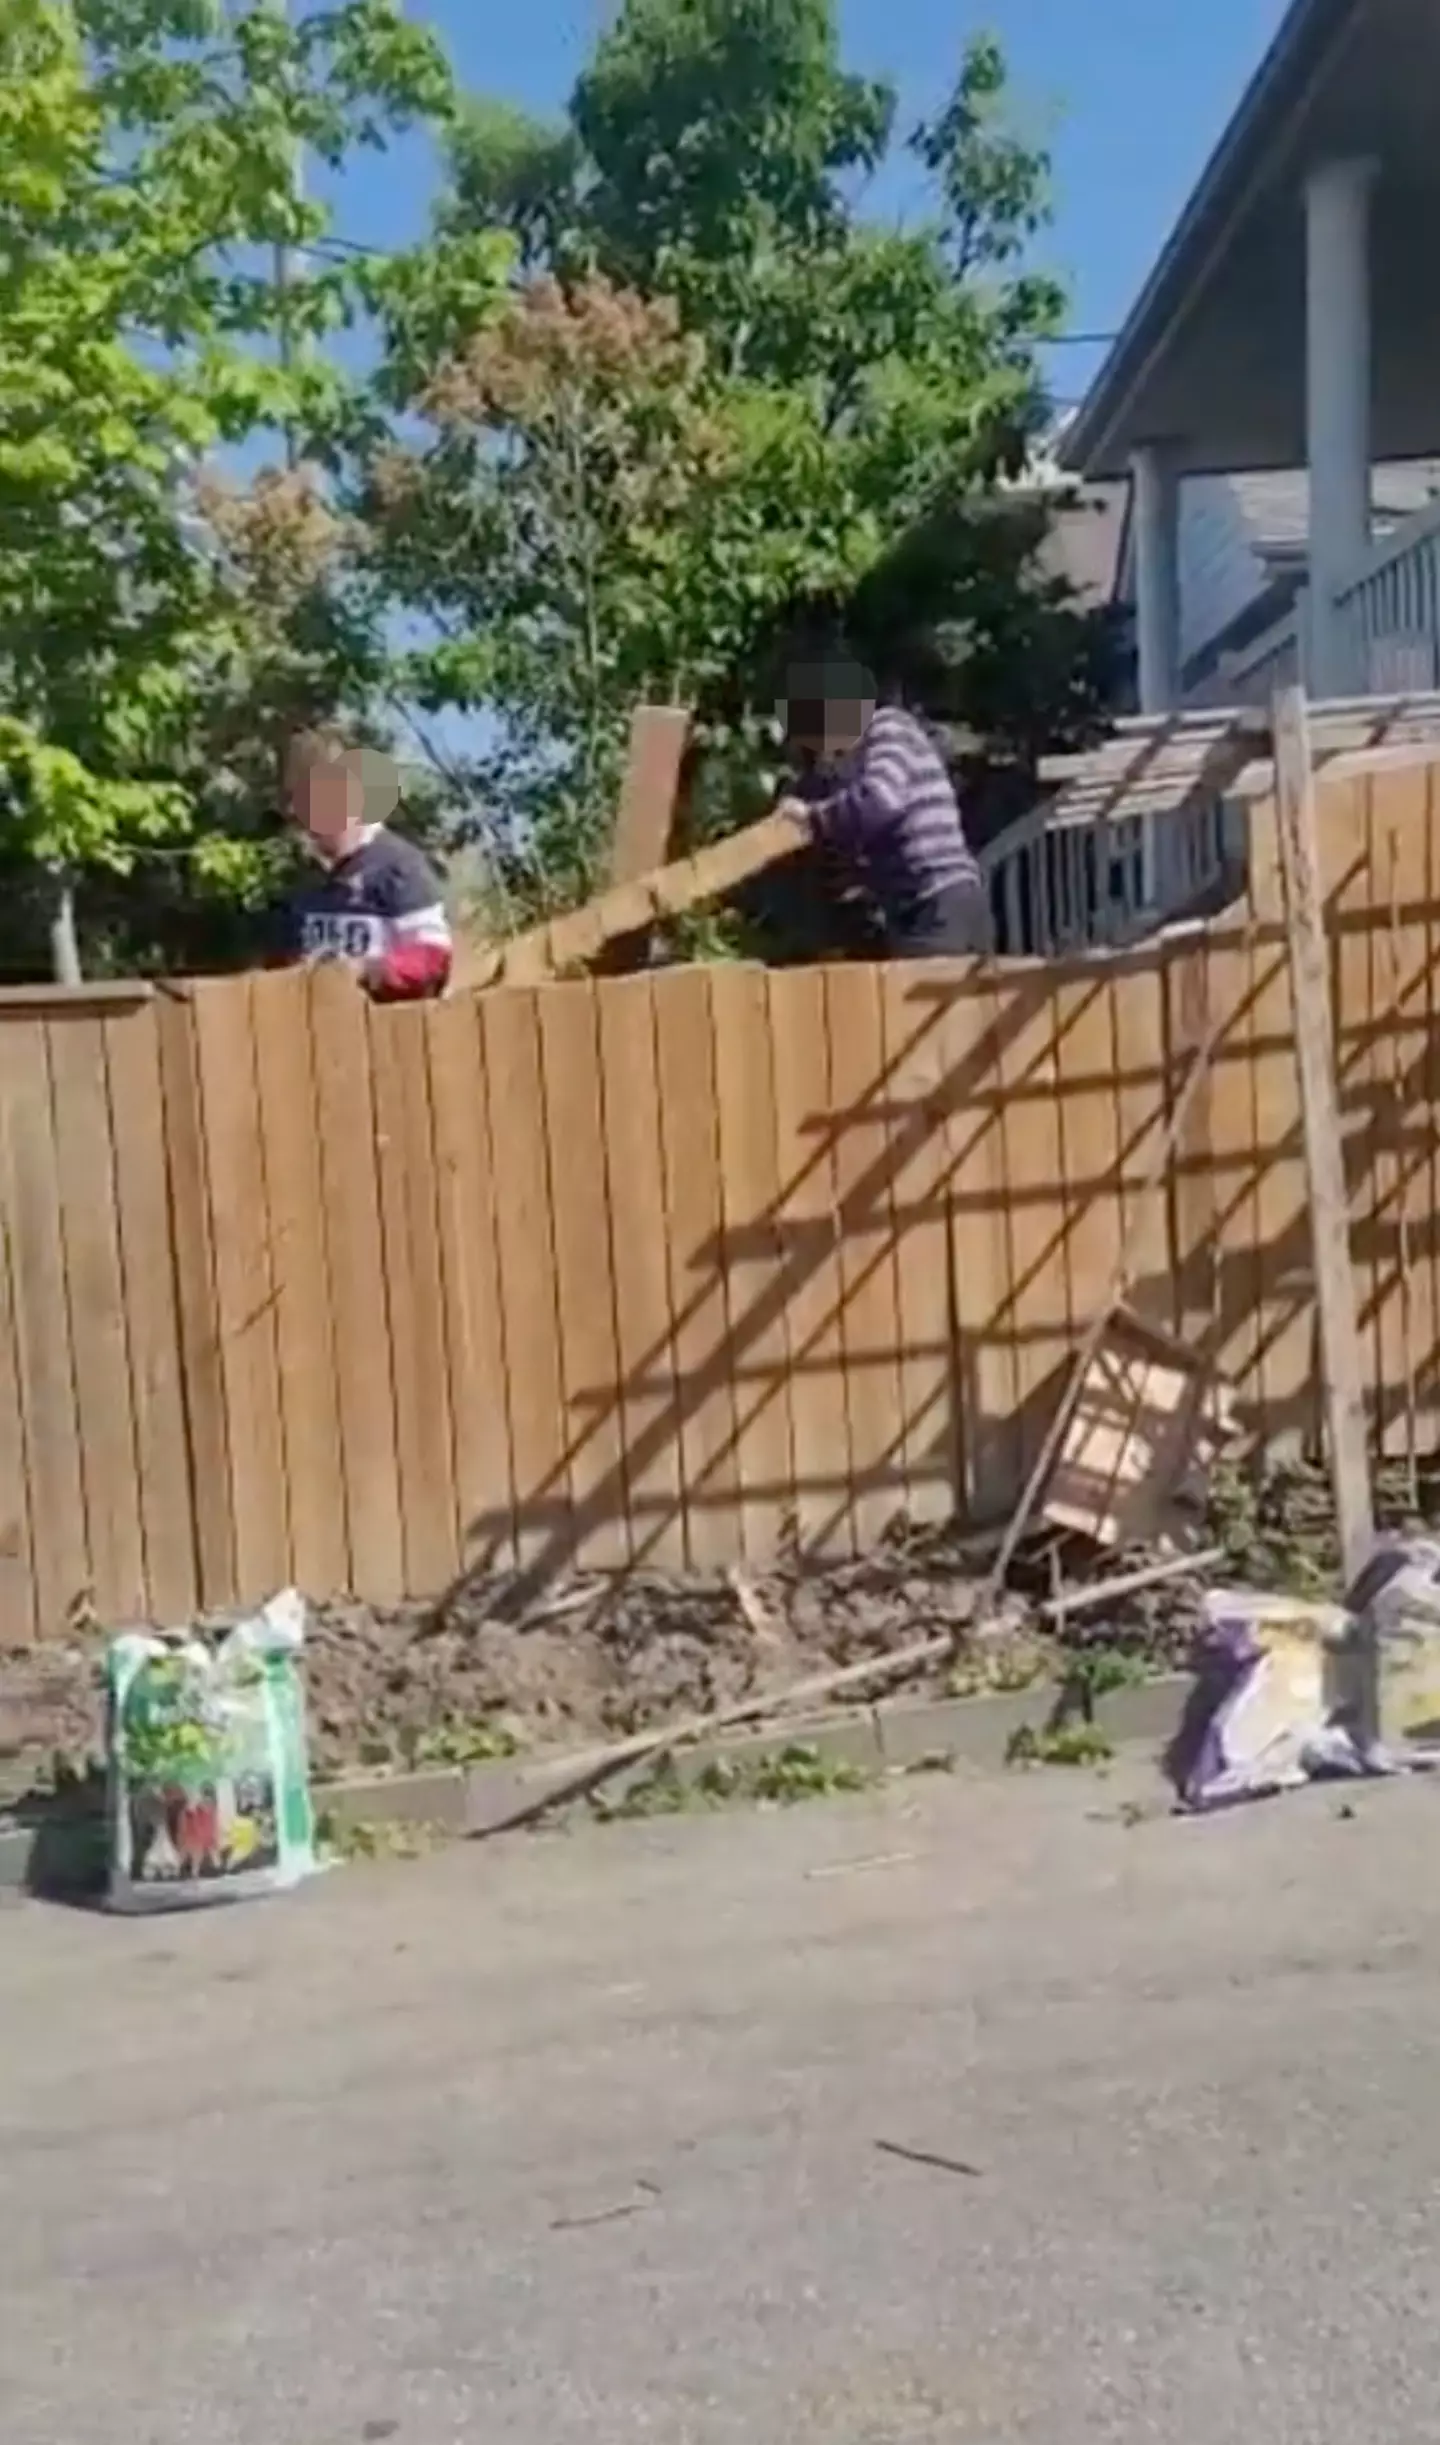 The couple then continue to chop the fence down.